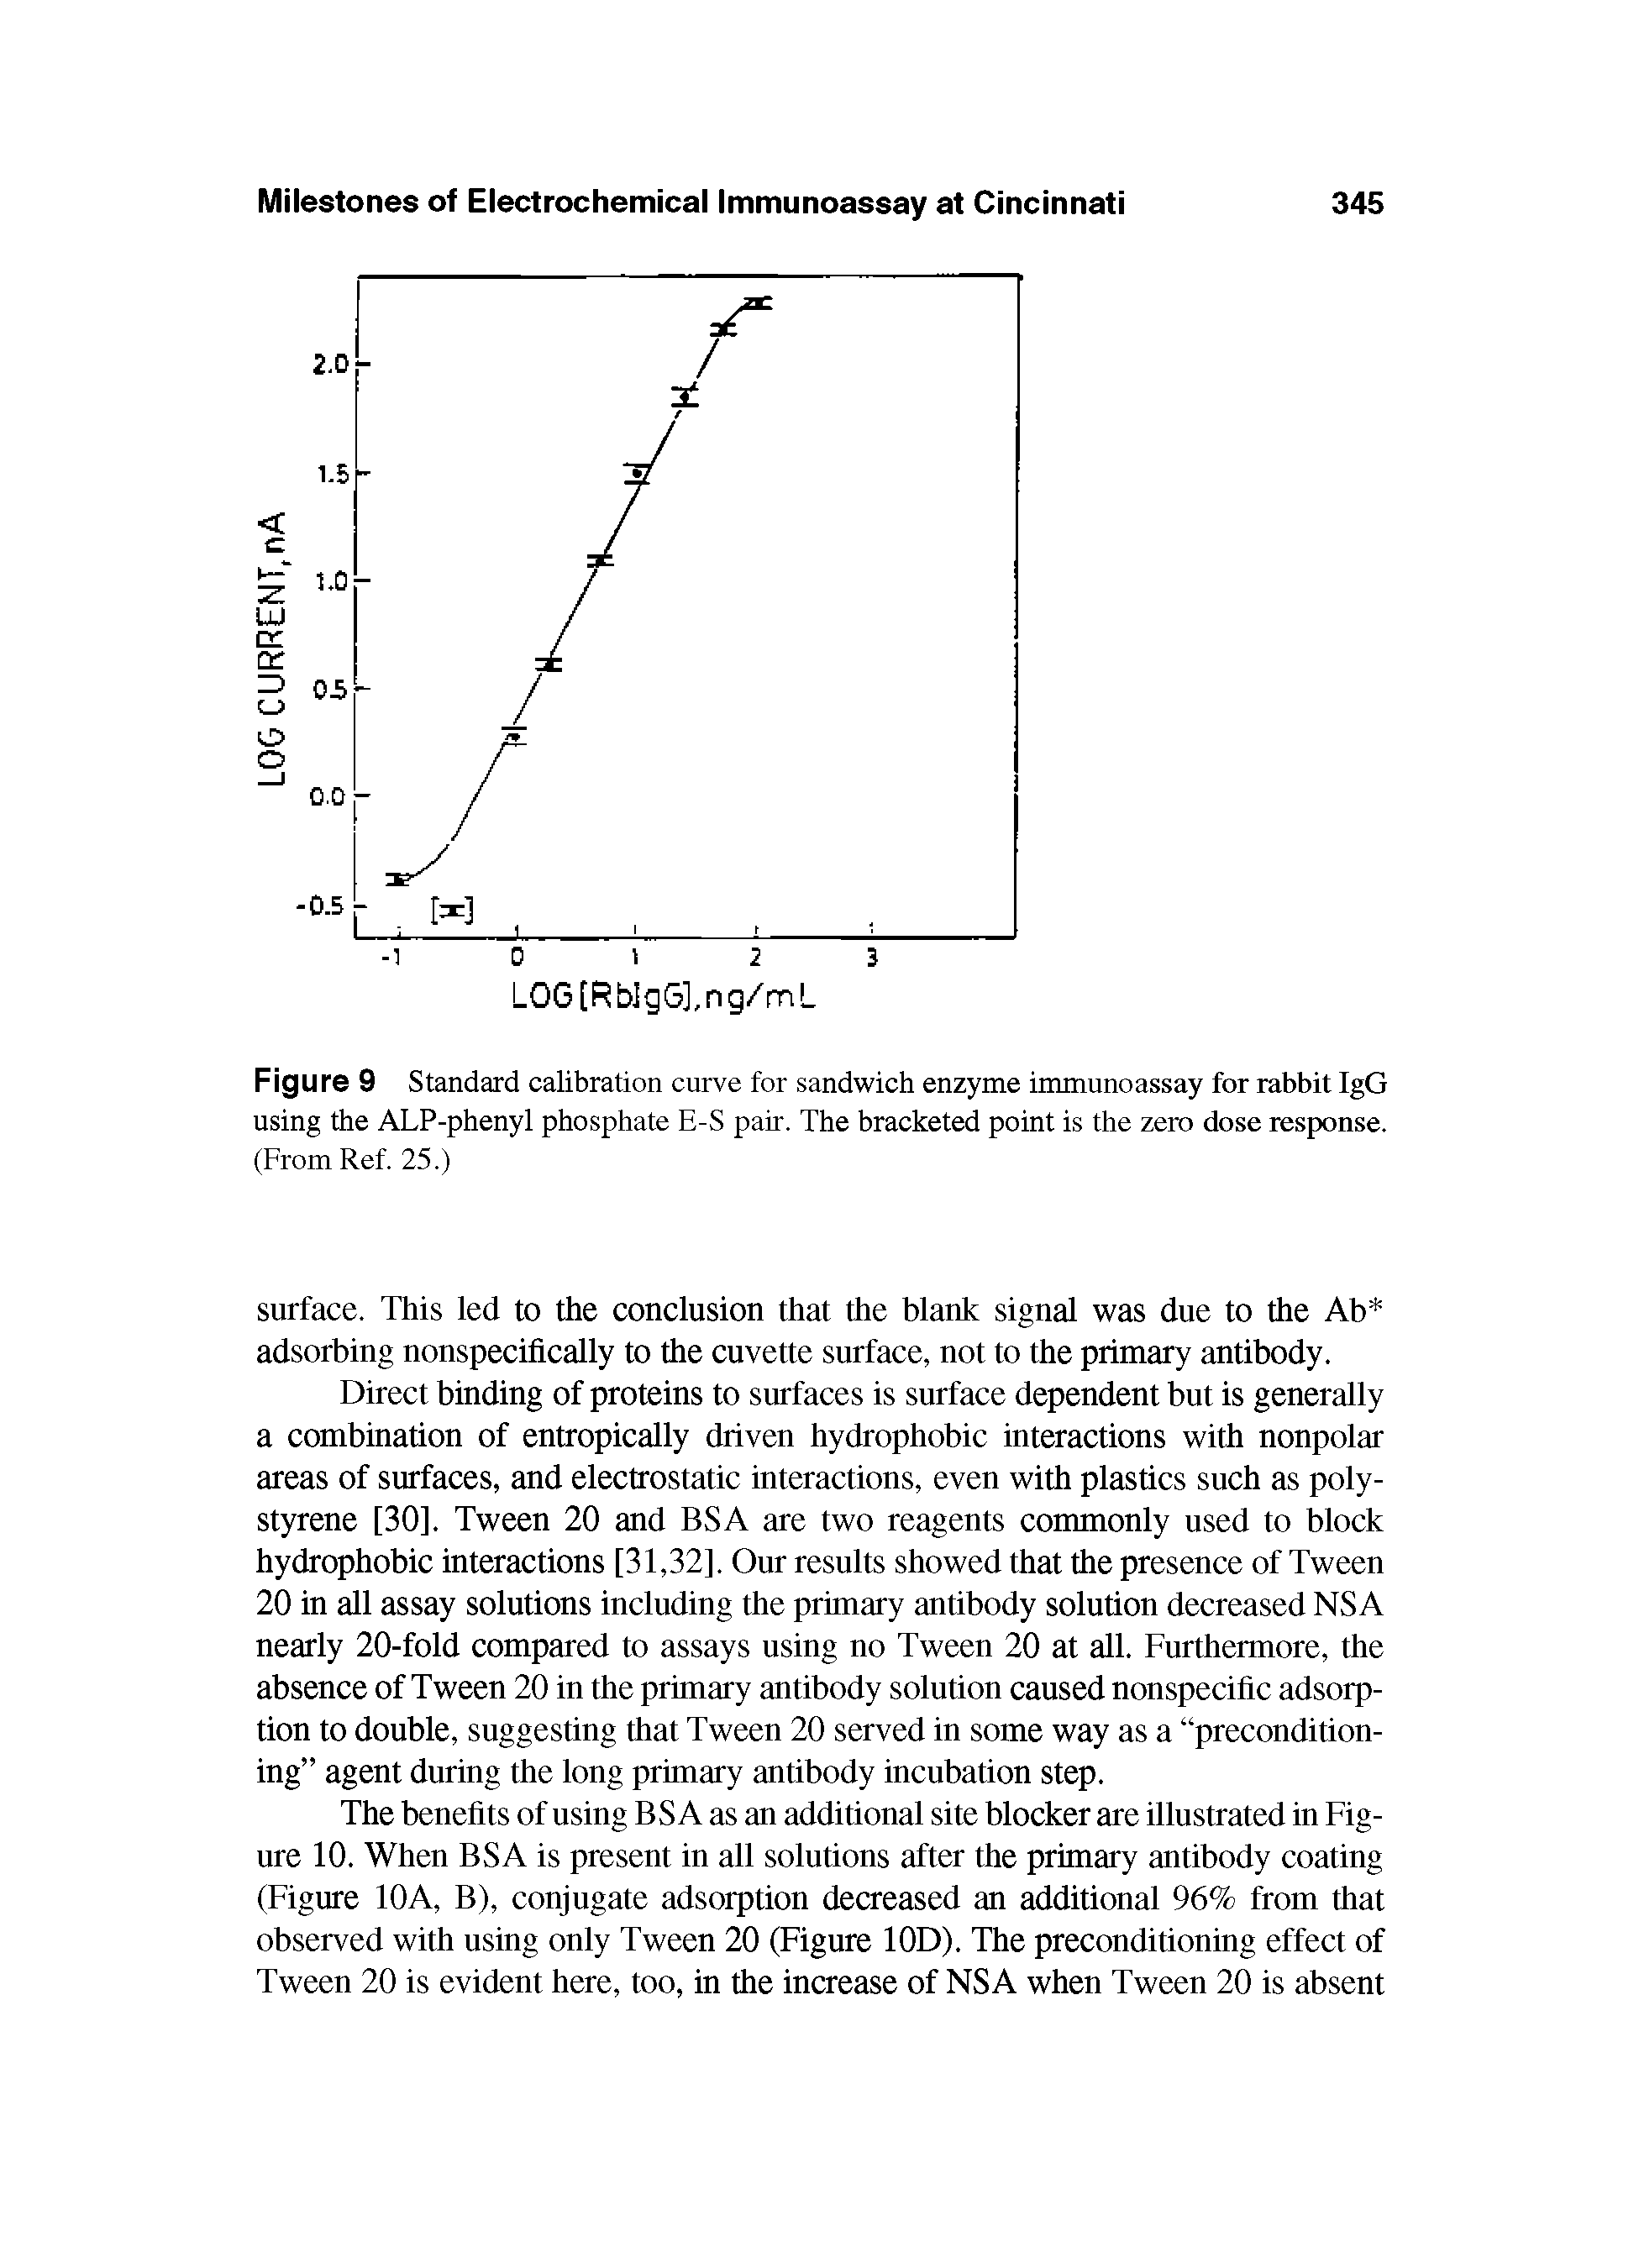 Figure 9 Standard calibration curve for sandwich enzyme immunoassay for rabbit IgG using the ALP-phenyl phosphate E-S pair. The bracketed point is the zero dose response.